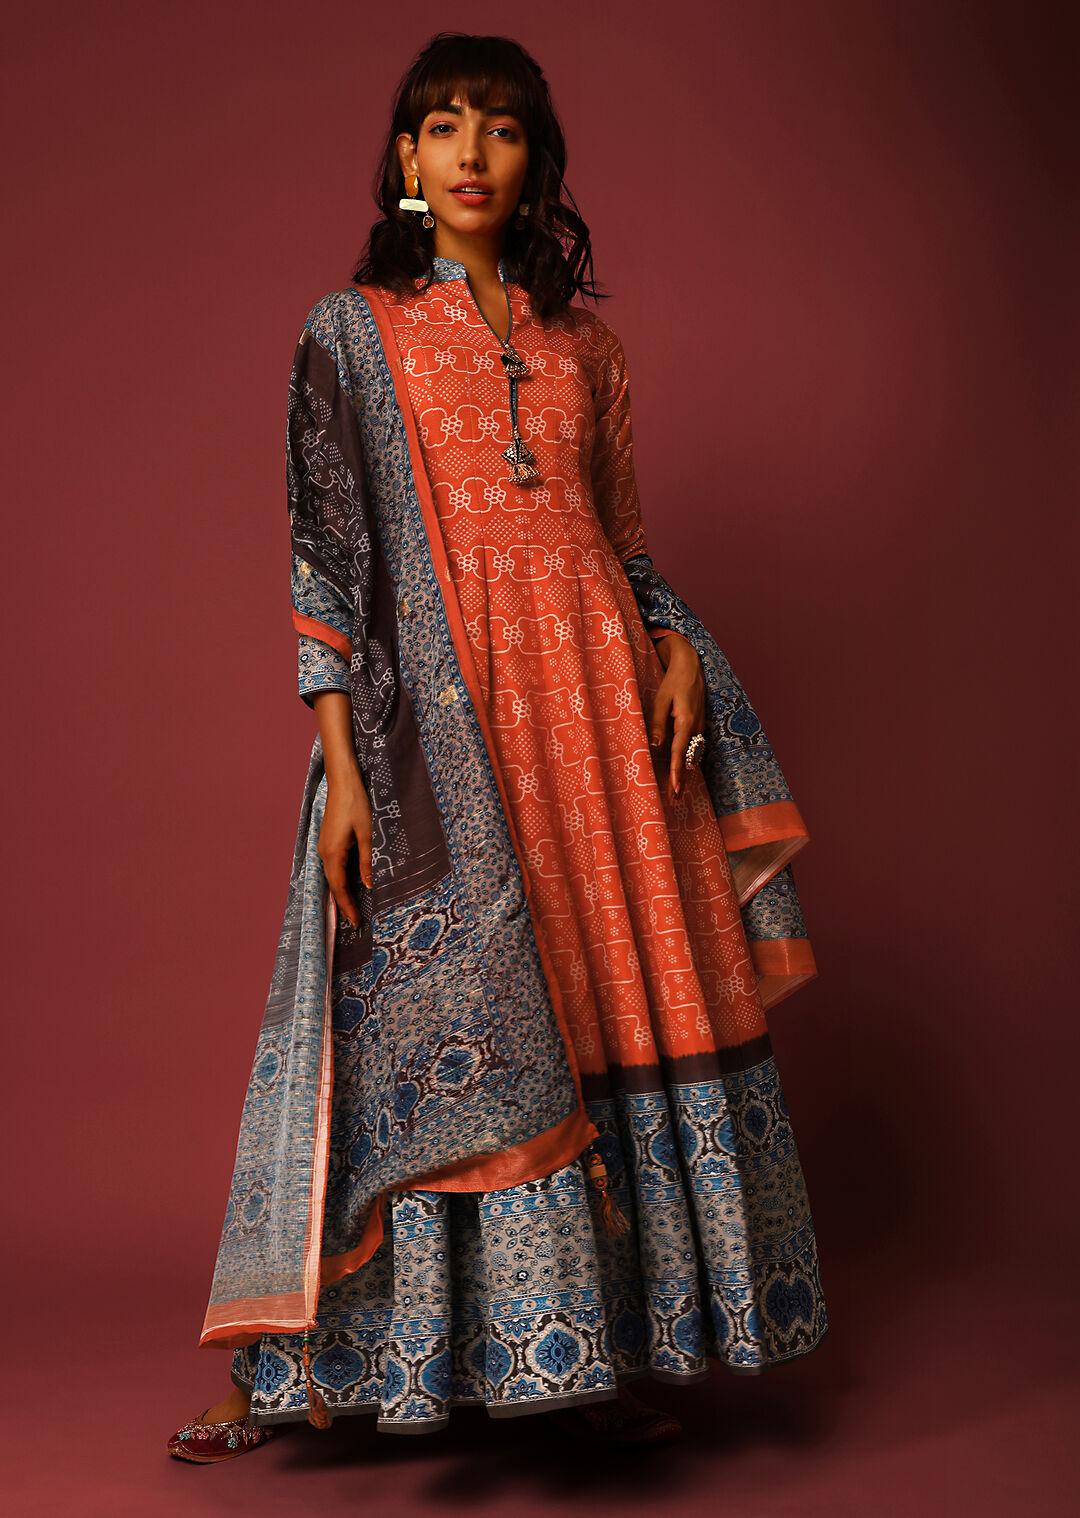 Orange Ethnic Motif Anarkali Indian Clothing in Denver, CO, Aurora, CO, Boulder, CO, Fort Collins, CO, Colorado Springs, CO, Parker, CO, Highlands Ranch, CO, Cherry Creek, CO, Centennial, CO, and Longmont, CO. NATIONWIDE SHIPPING USA- India Fashion X